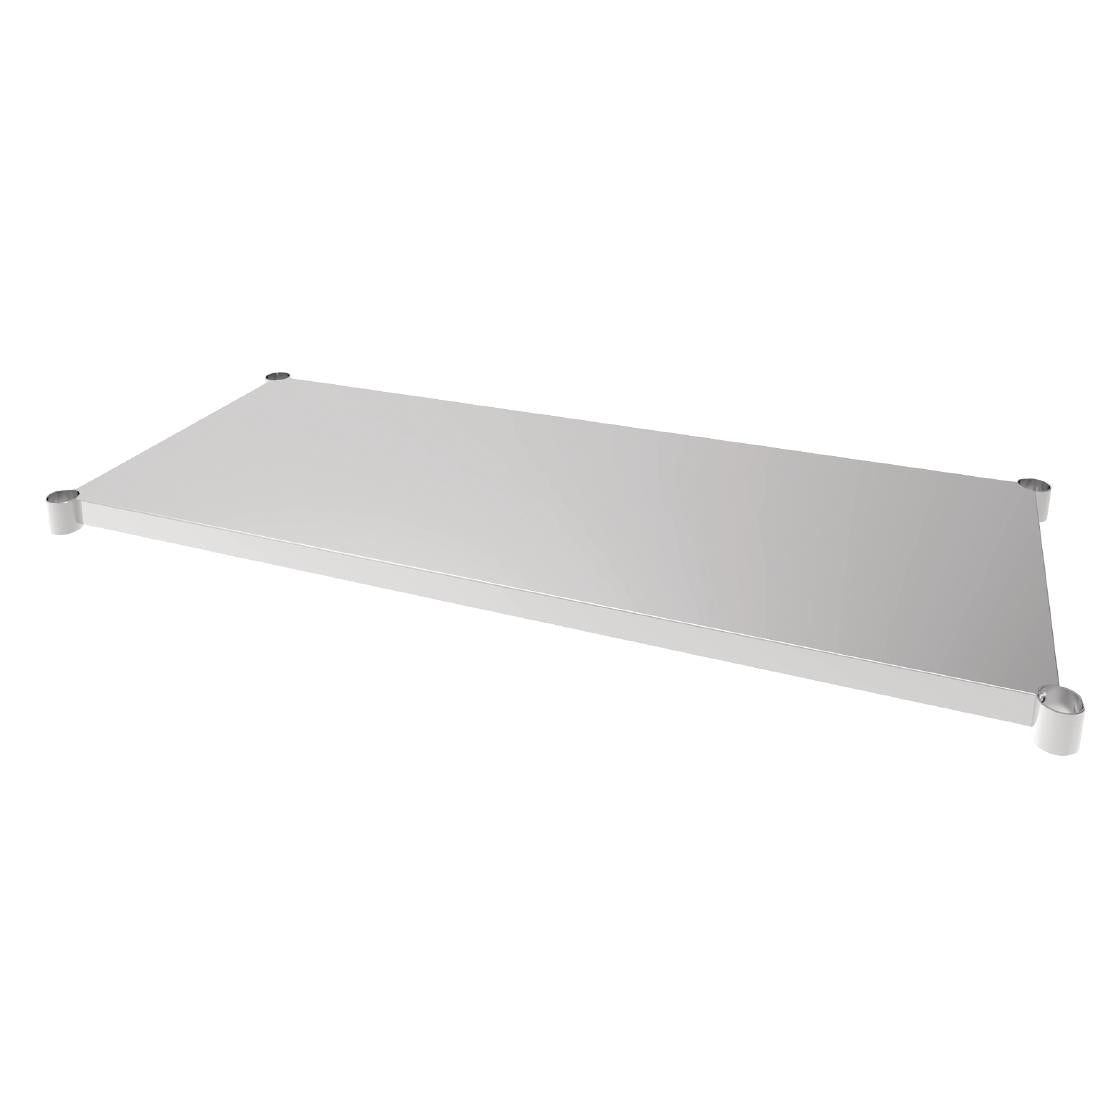 CP838 Vogue Steel Table Shelf 1500x700mm JD Catering Equipment Solutions Ltd